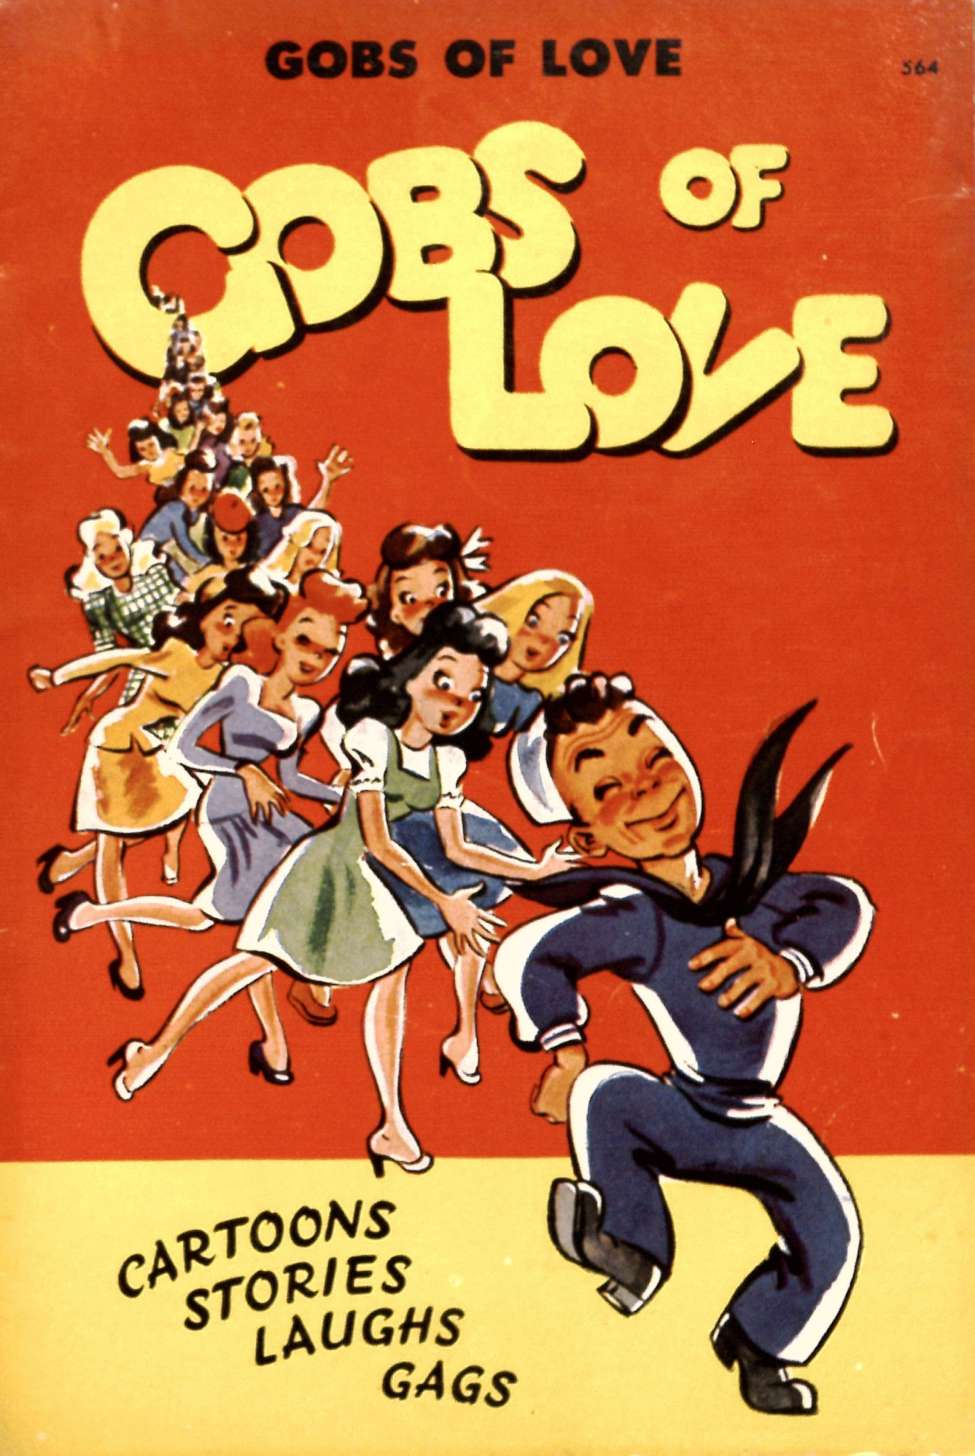 Book Cover For Best Books 564 - Gobs of Love